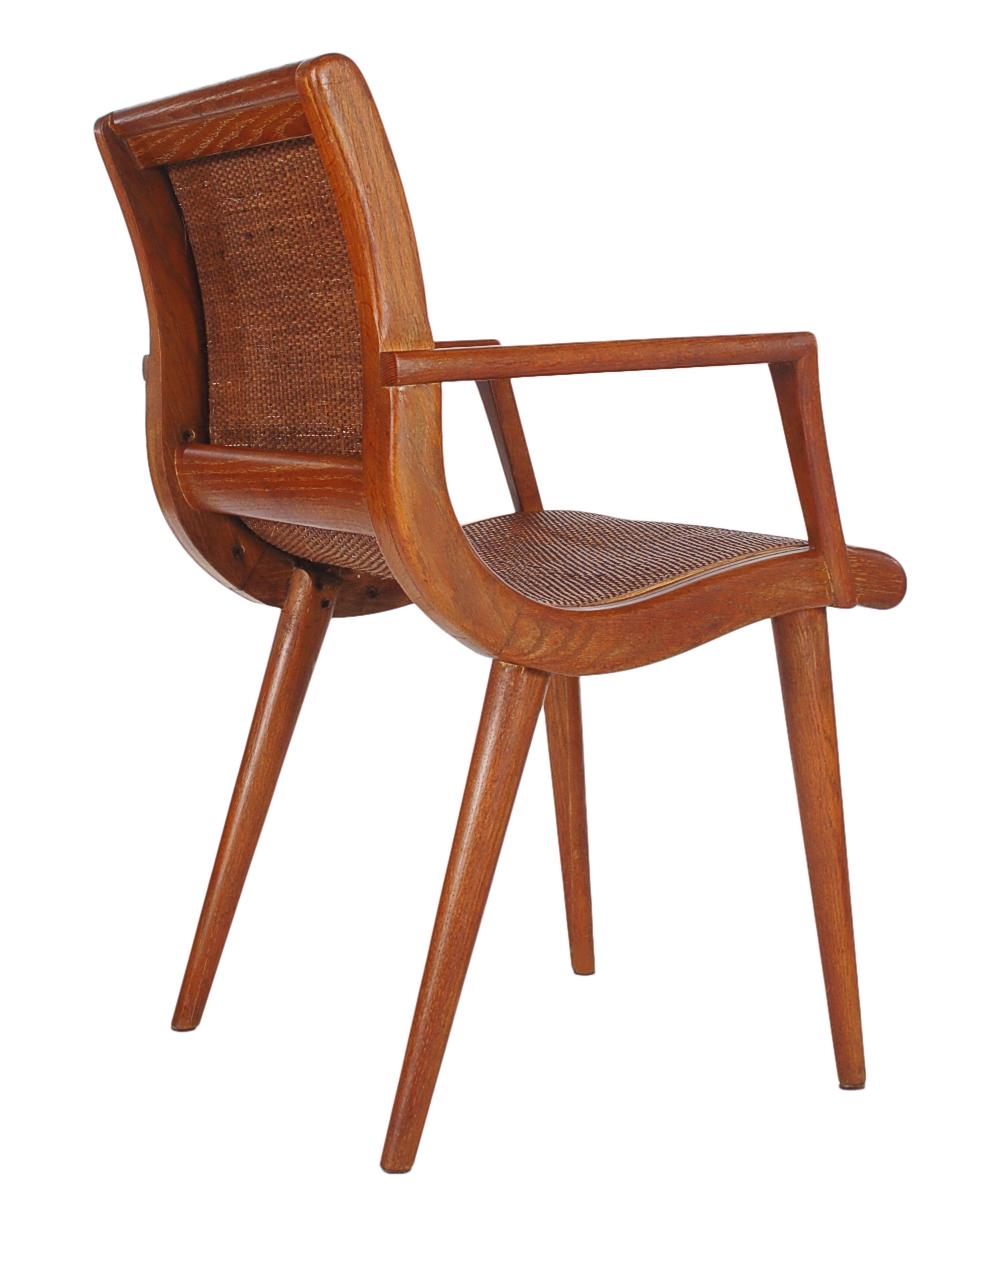 American Mid-Century Modern Cane and Oak Danish Modern Style Armchair or Side Chair